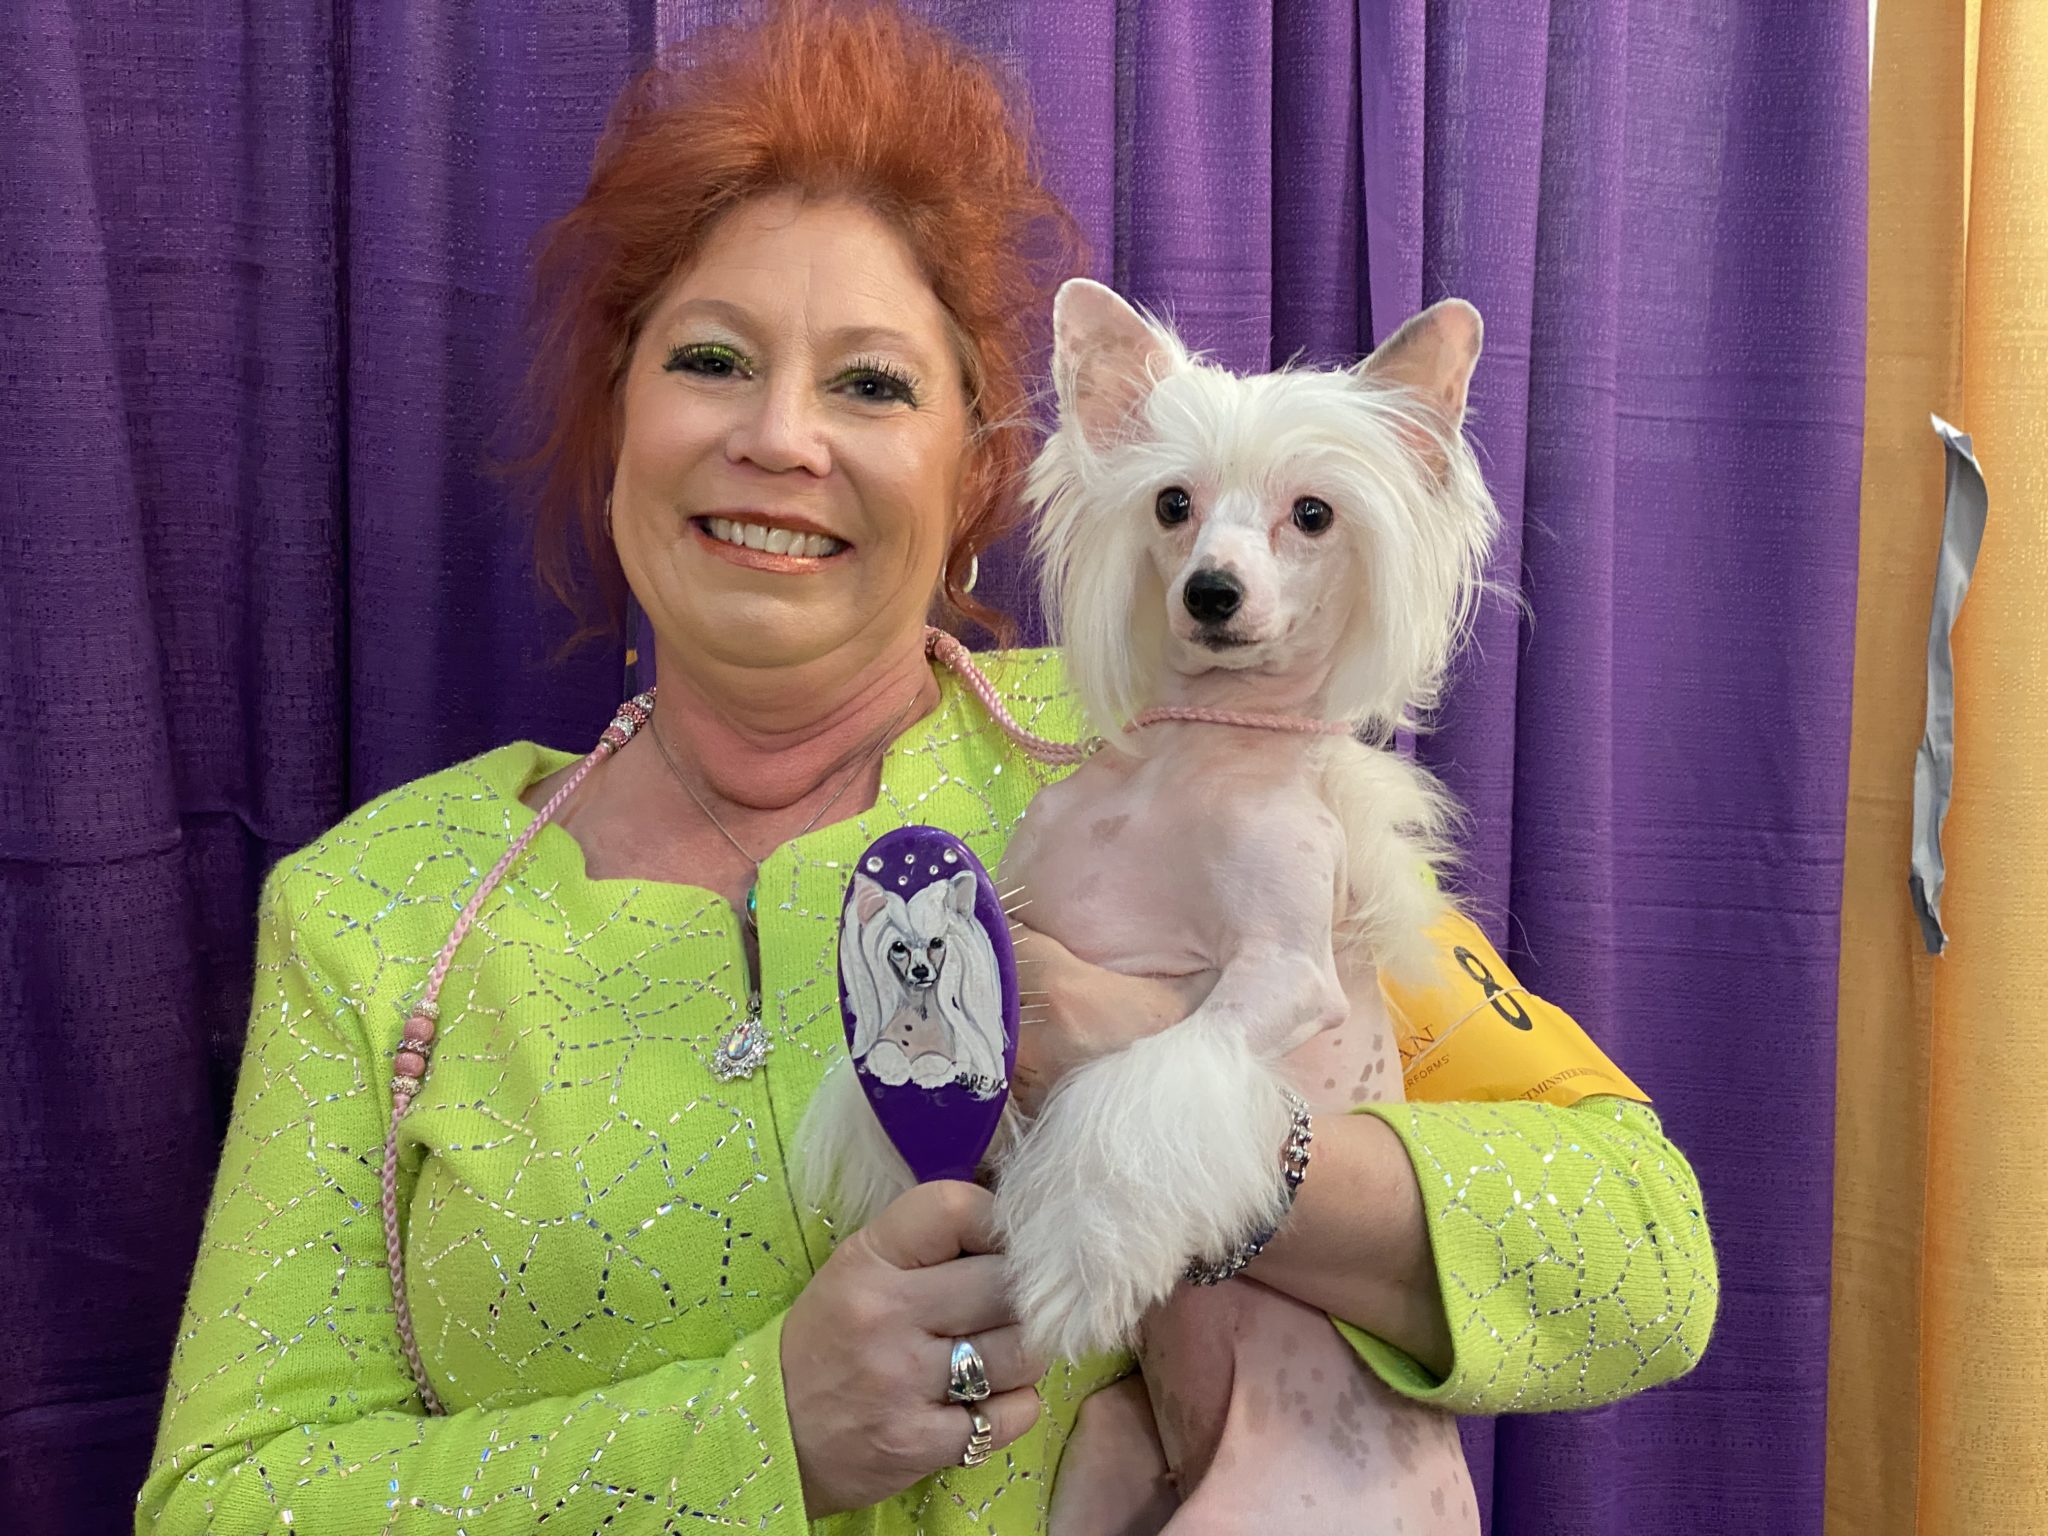 Owner and handler Kathy with "Jiggy" age 4